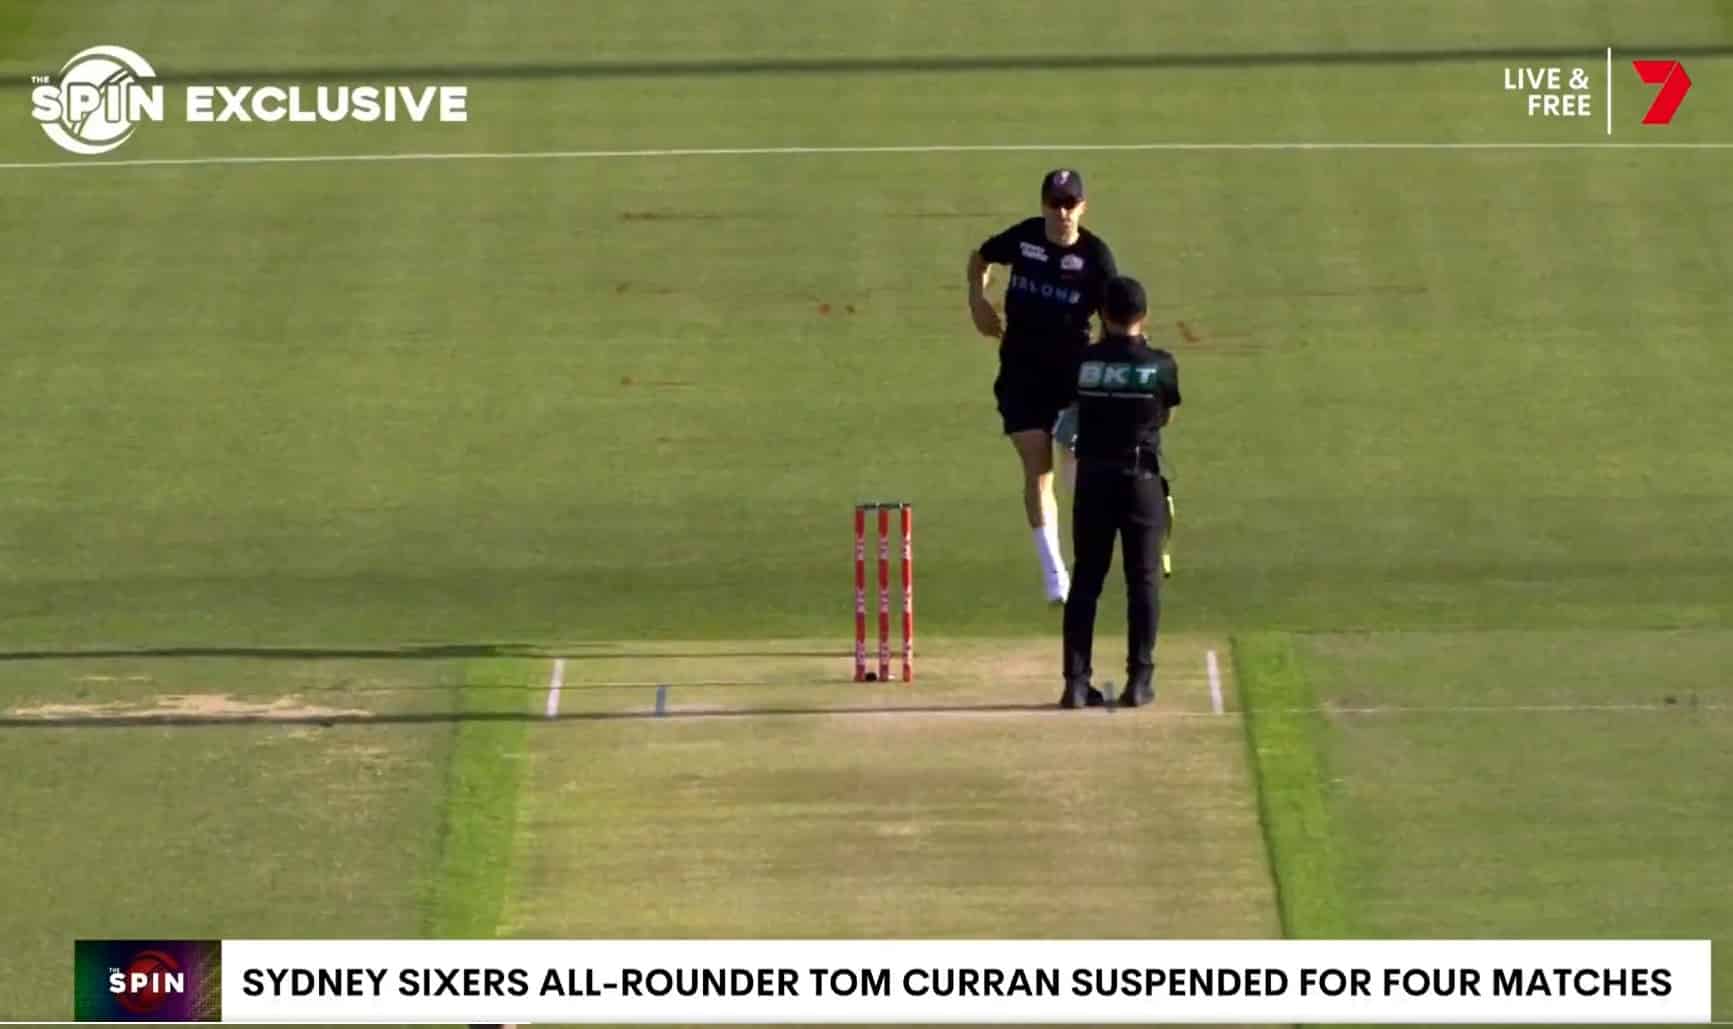 English cricketer tries to staunch an umpire before a Big Bash match (lol)